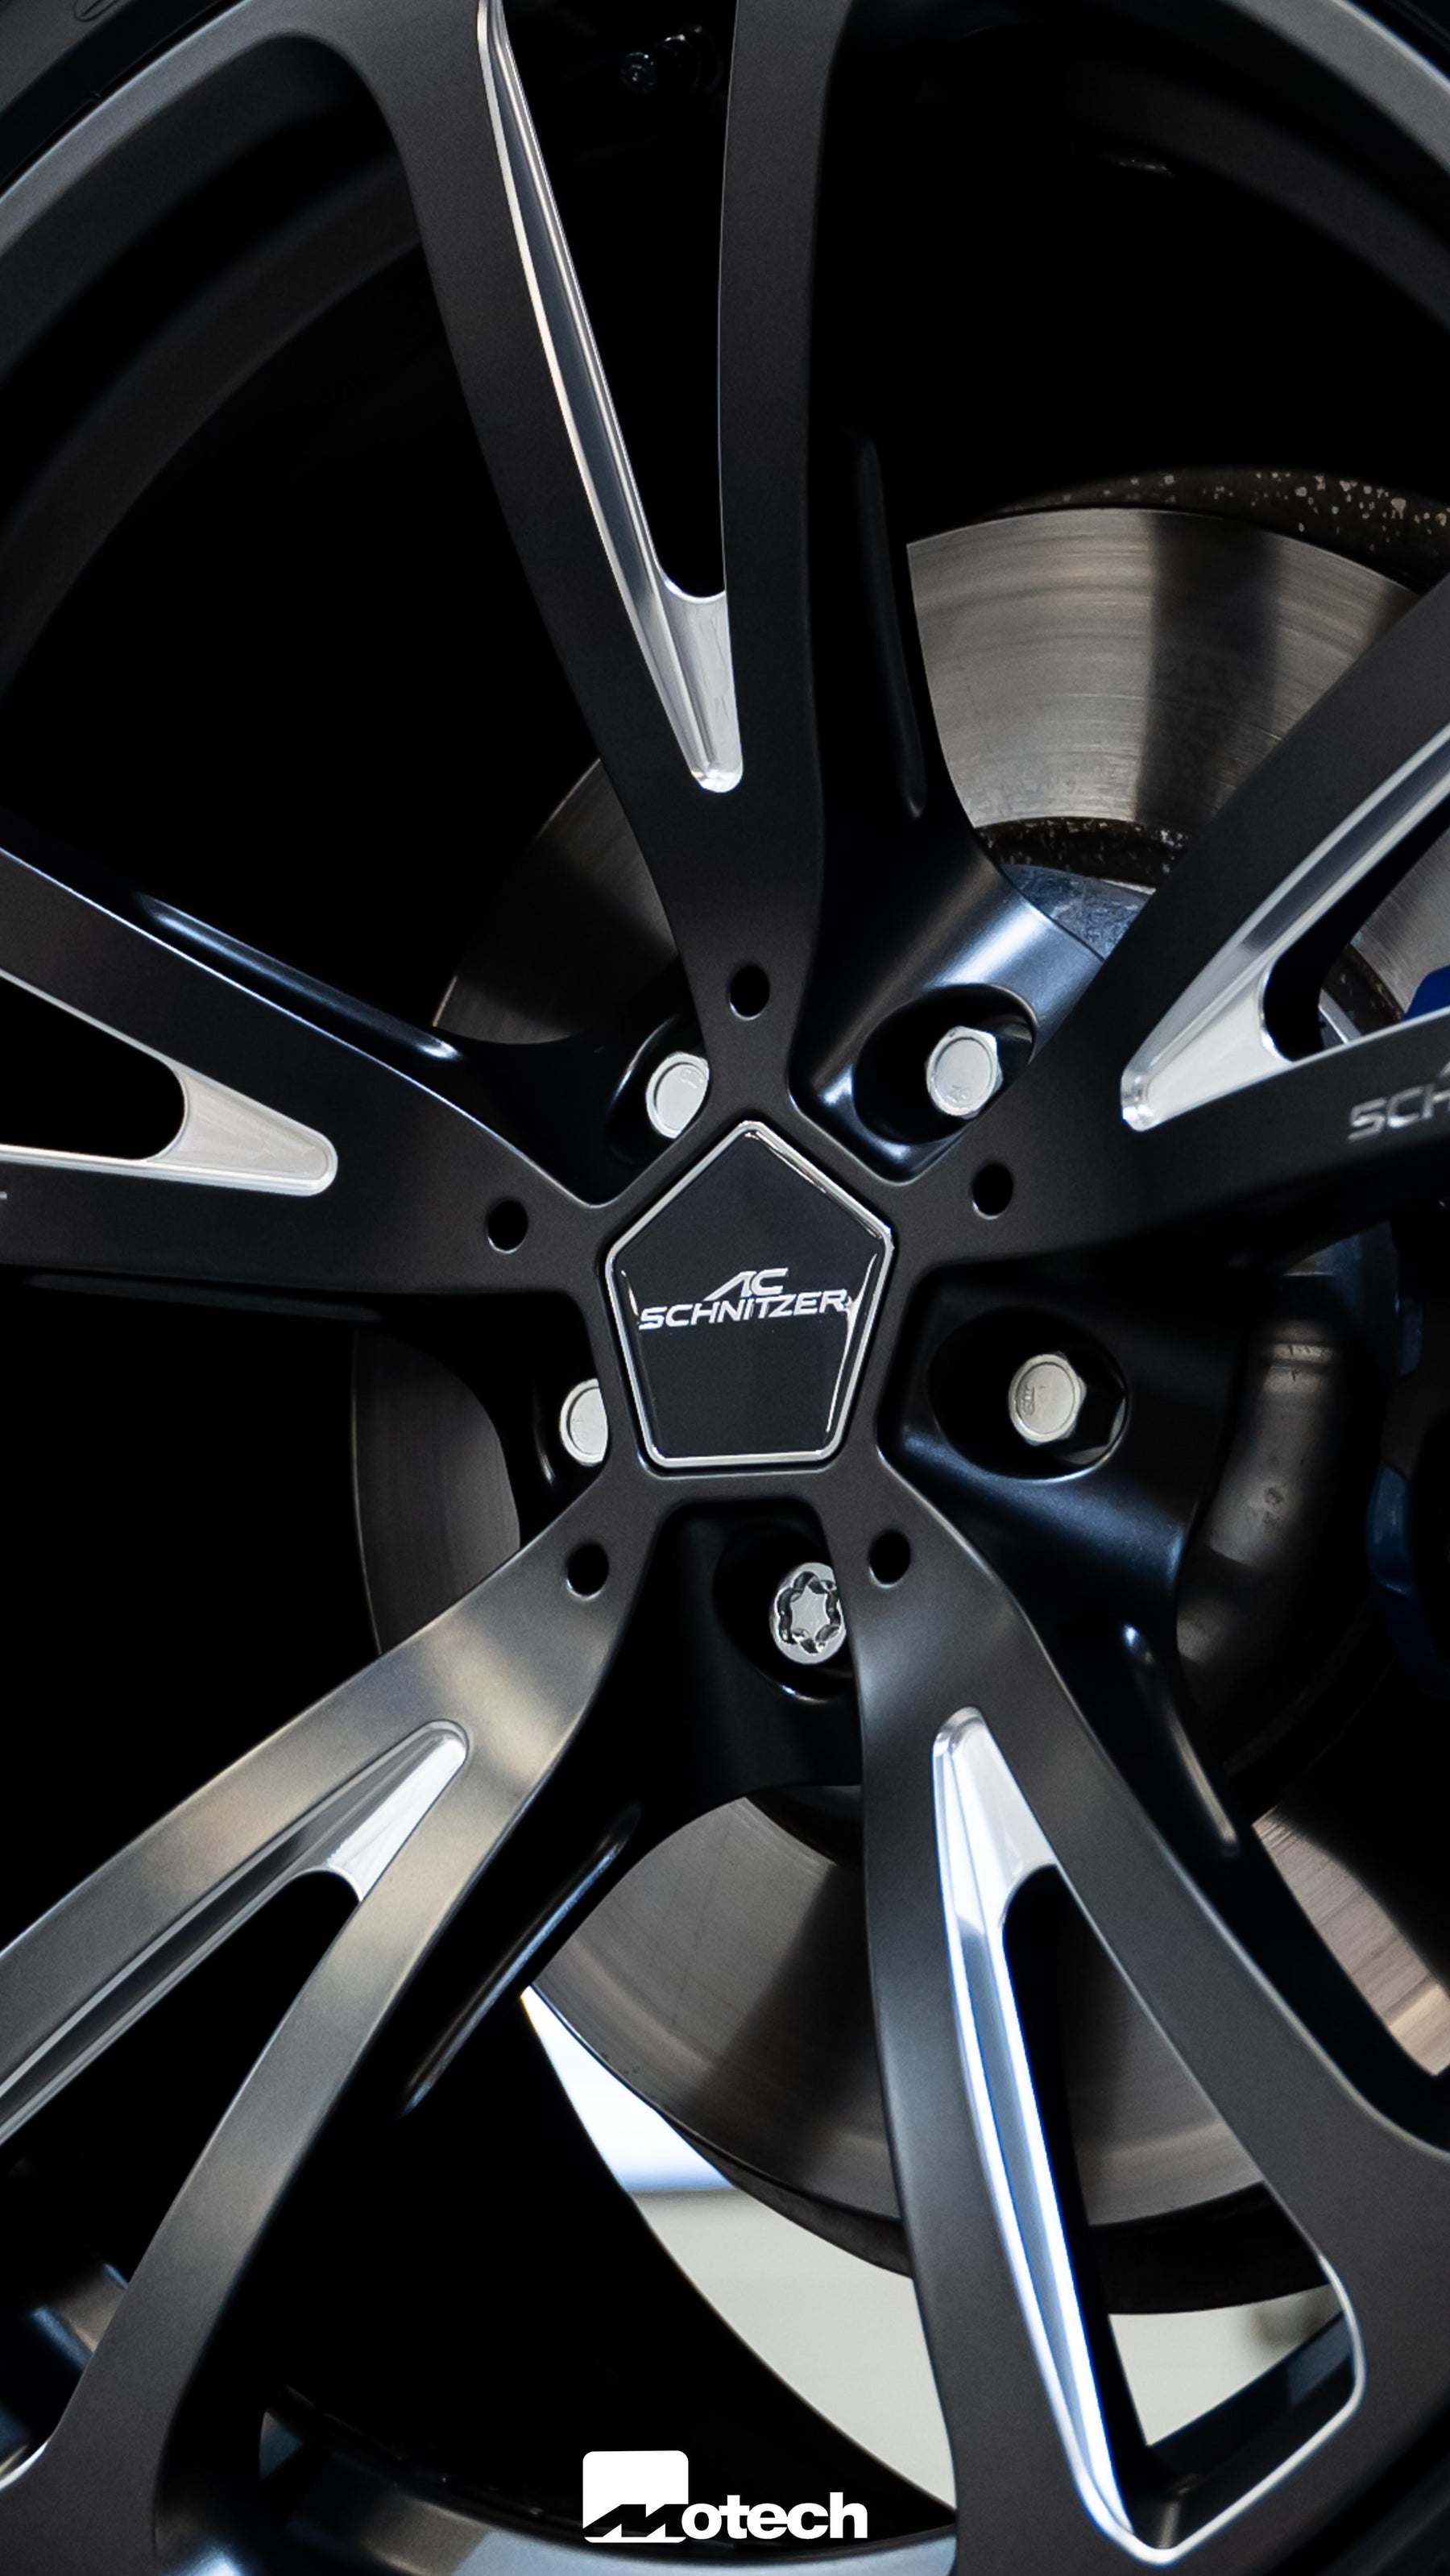 AC3 20" forged anthracite alloy wheels